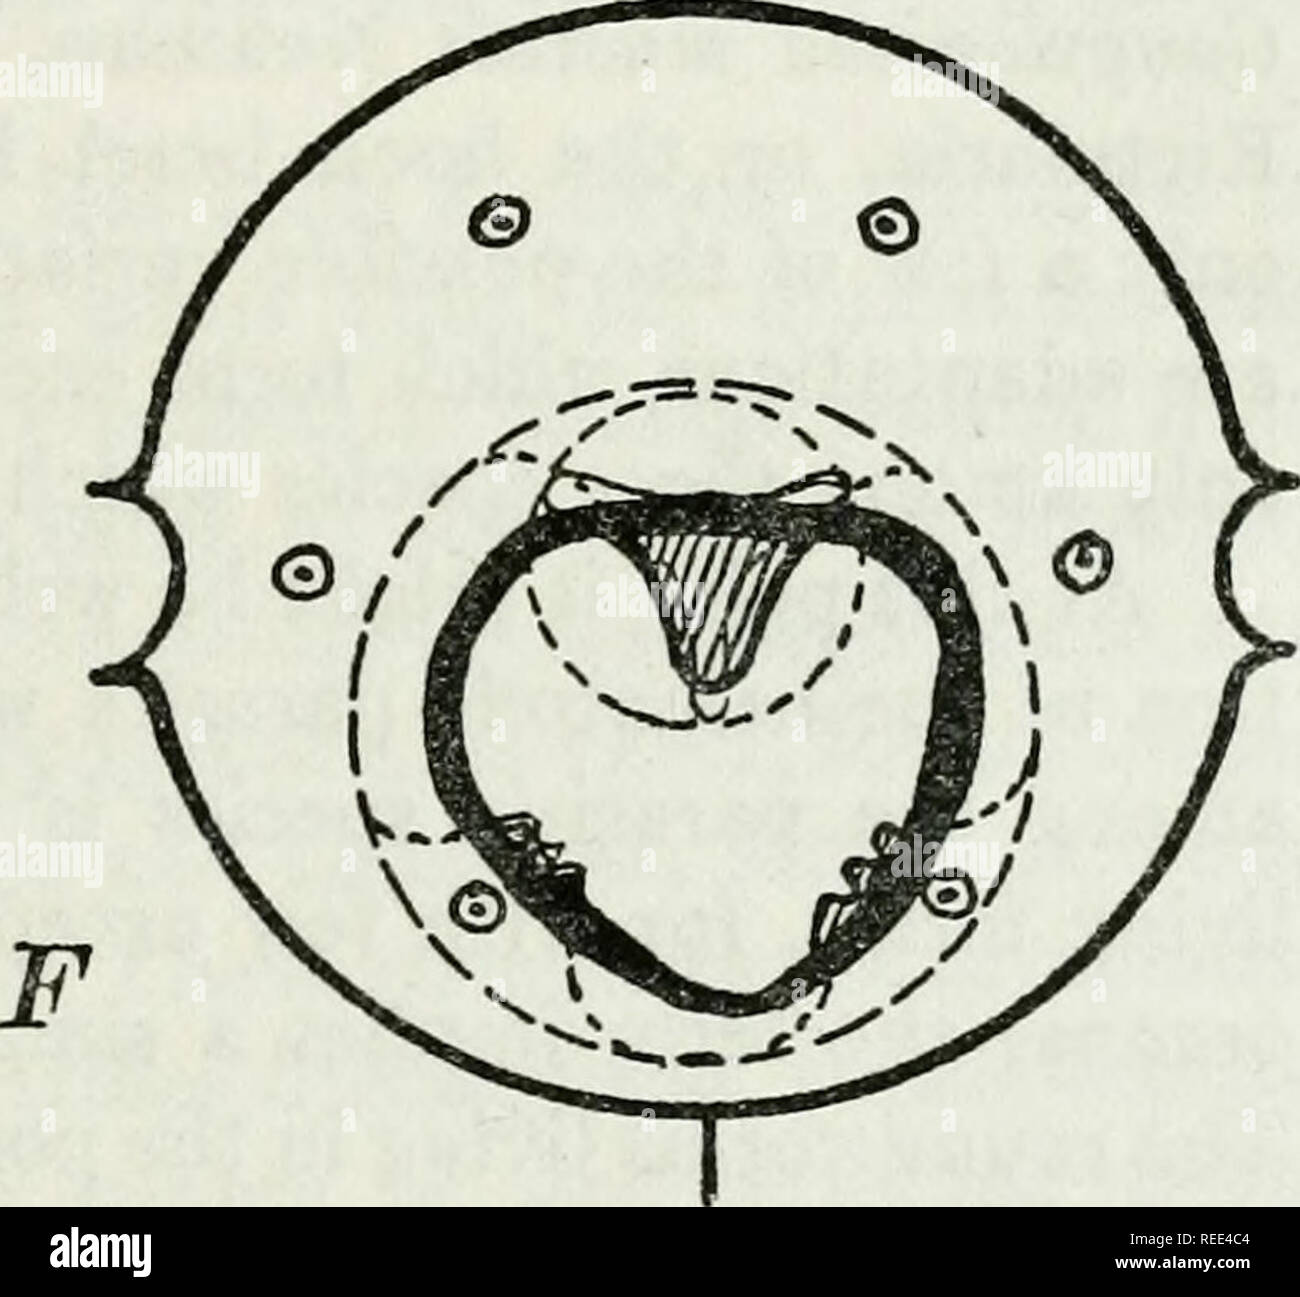 . Comparative studies on certain features of nematodes and their significance. Nematoda. Text Fig. E. Diagram of a nematode head en face showing asymmetry. Text Fig. F. Diagram showing a typical case of bilaterality in a capsulated cephalic region. flesh of the host containing the encysted immature worms. The gravid female of Hepaticola hepatica Hall dies in the liver tissue of the host, leaving there a mass of eggs which have no way of reaching the exterior or attaining a new host. In such a case, cannibalism seems to be the only agent upon which the species can depend for propagation. From t Stock Photo